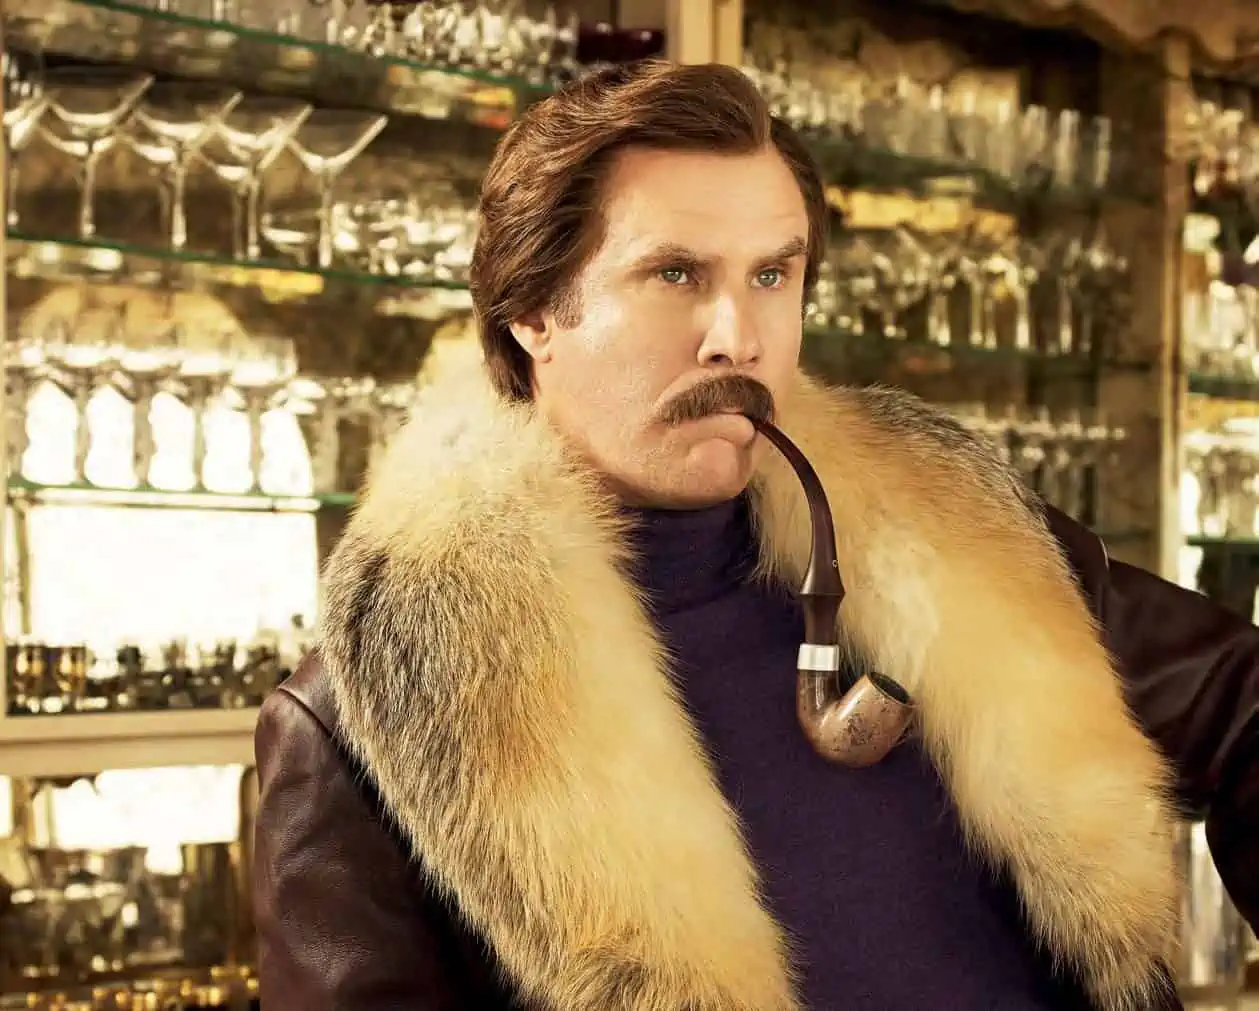 The fictional Ron Burgundy can often be seen in outfits including turtleneck sweaters